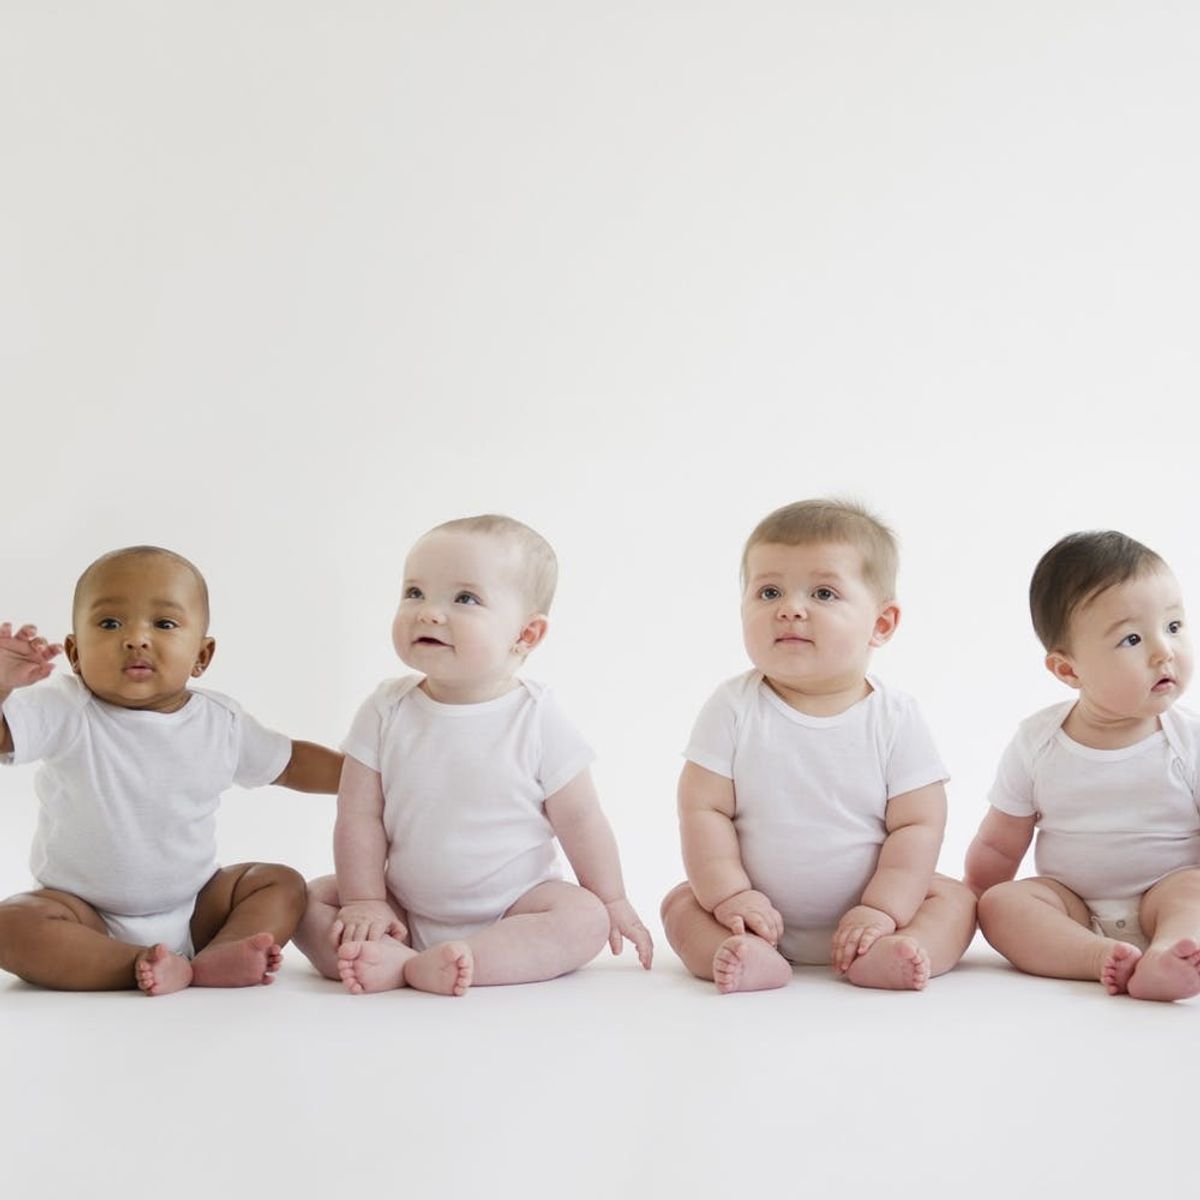 These Are the Most Popular Baby Names by State